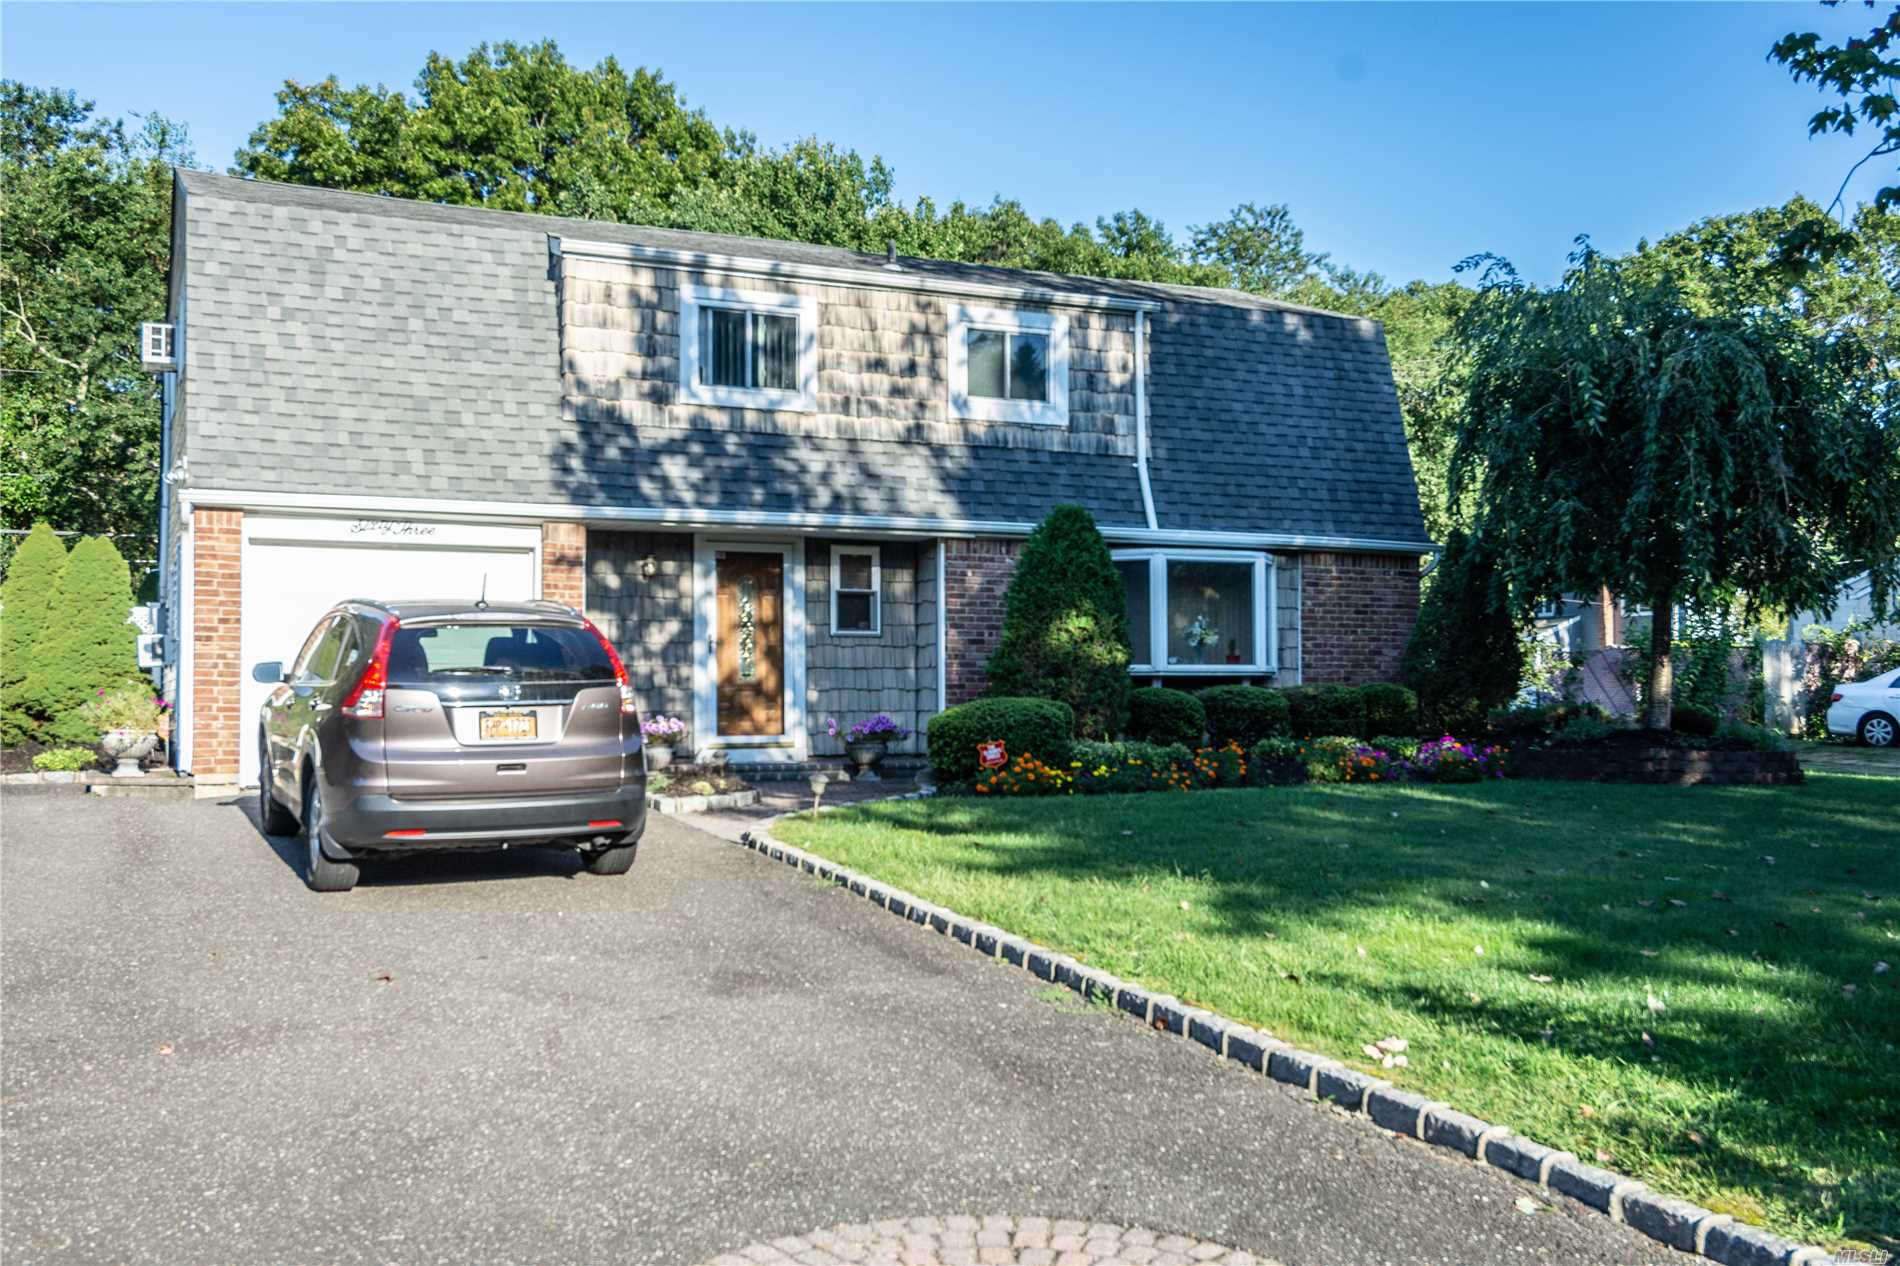 Beautiful 4 Br 1.5 Bath Colonial In Desired Mt Sinai Schools. Features Granite Counter Tops,  Stainless Steel Appliances. Hardwood Floors. Freshly Painted, Crown Moldings. Hi Hat Lighting. New Baths, New Roof, New Heating System, Large Back Yard With Electric Awning, New Fence.